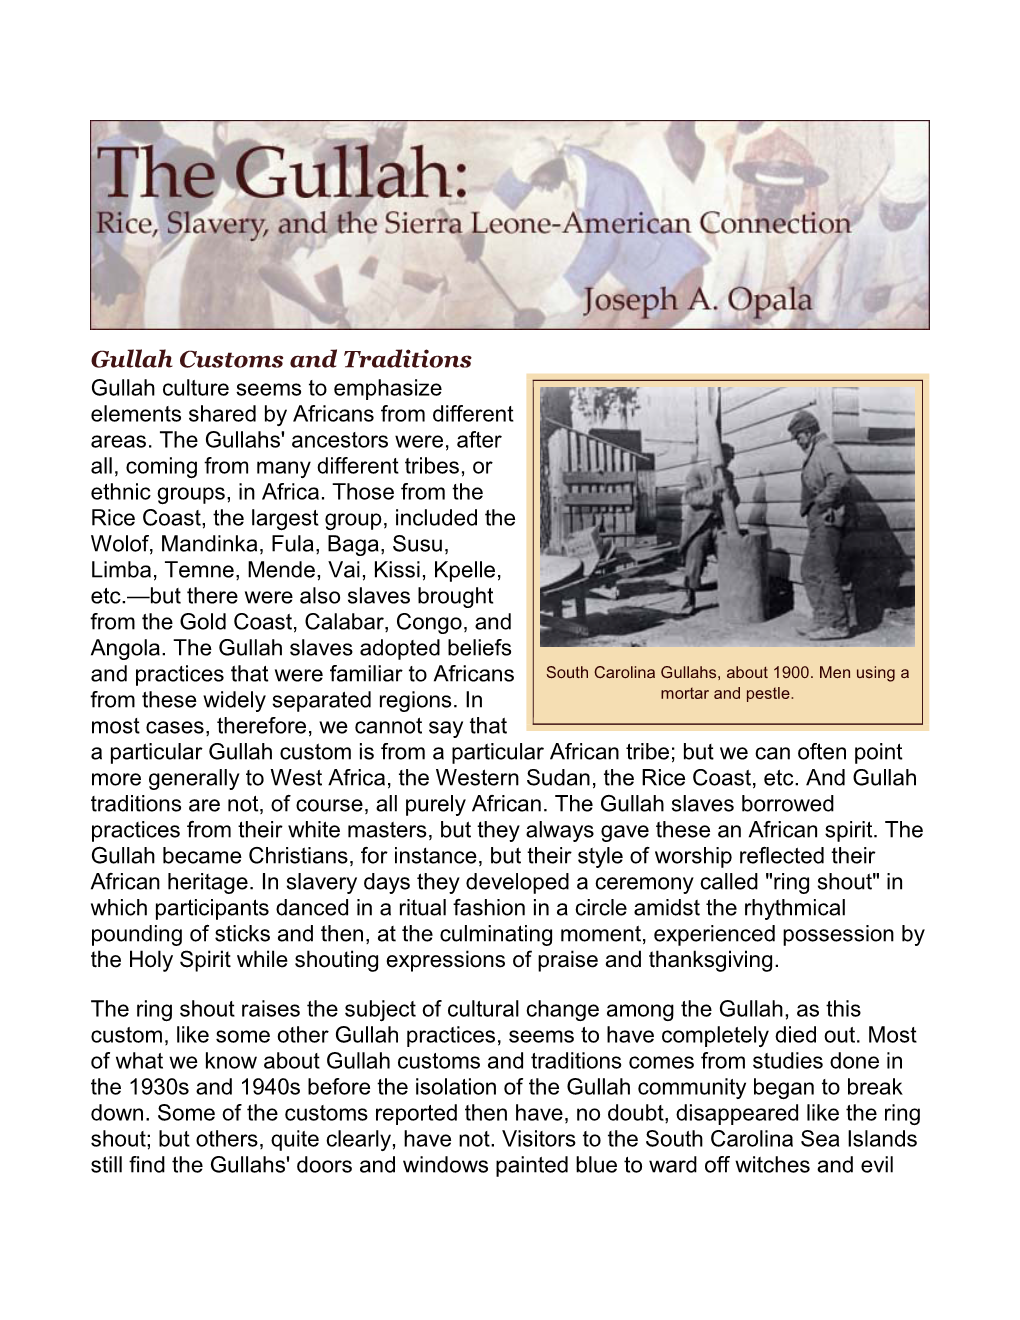 Gullah Customs and Traditions Gullah Culture Seems to Emphasize Elements Shared by Africans from Different Areas